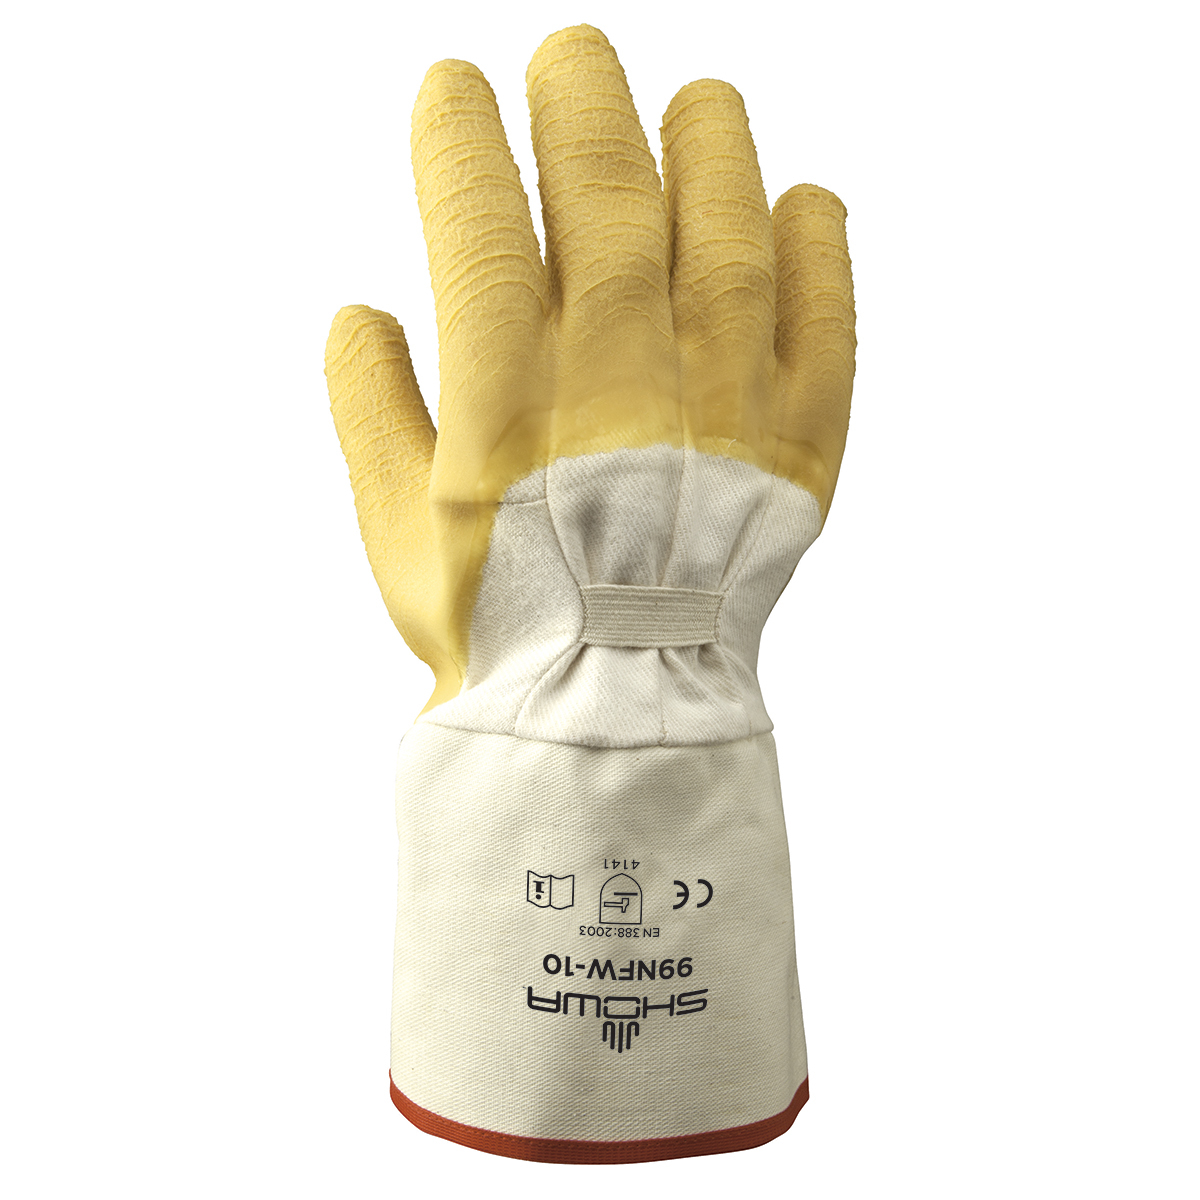 Airgas - B1399NFW-10 - SHOWA™ Size 10 Heavy Duty Natural Rubber Palm Coated  Work Gloves With Cotton Liner And Gauntlet Cuff